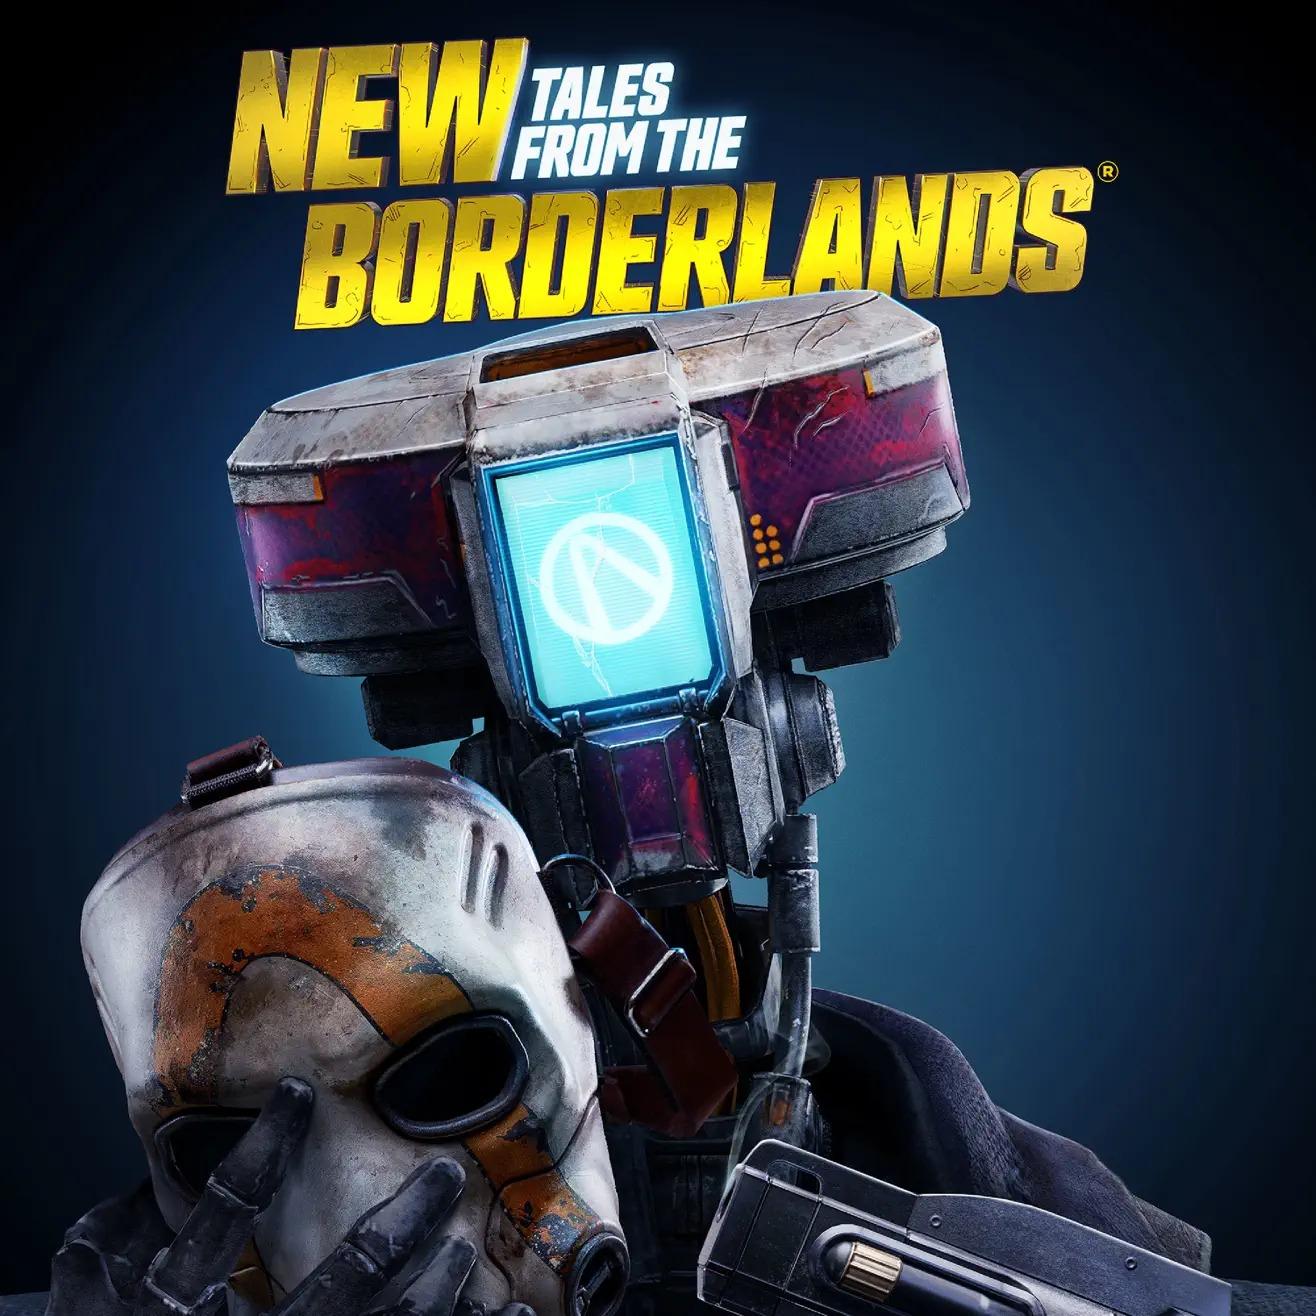 New Tales from the Borderlands (Original Soundtrack)